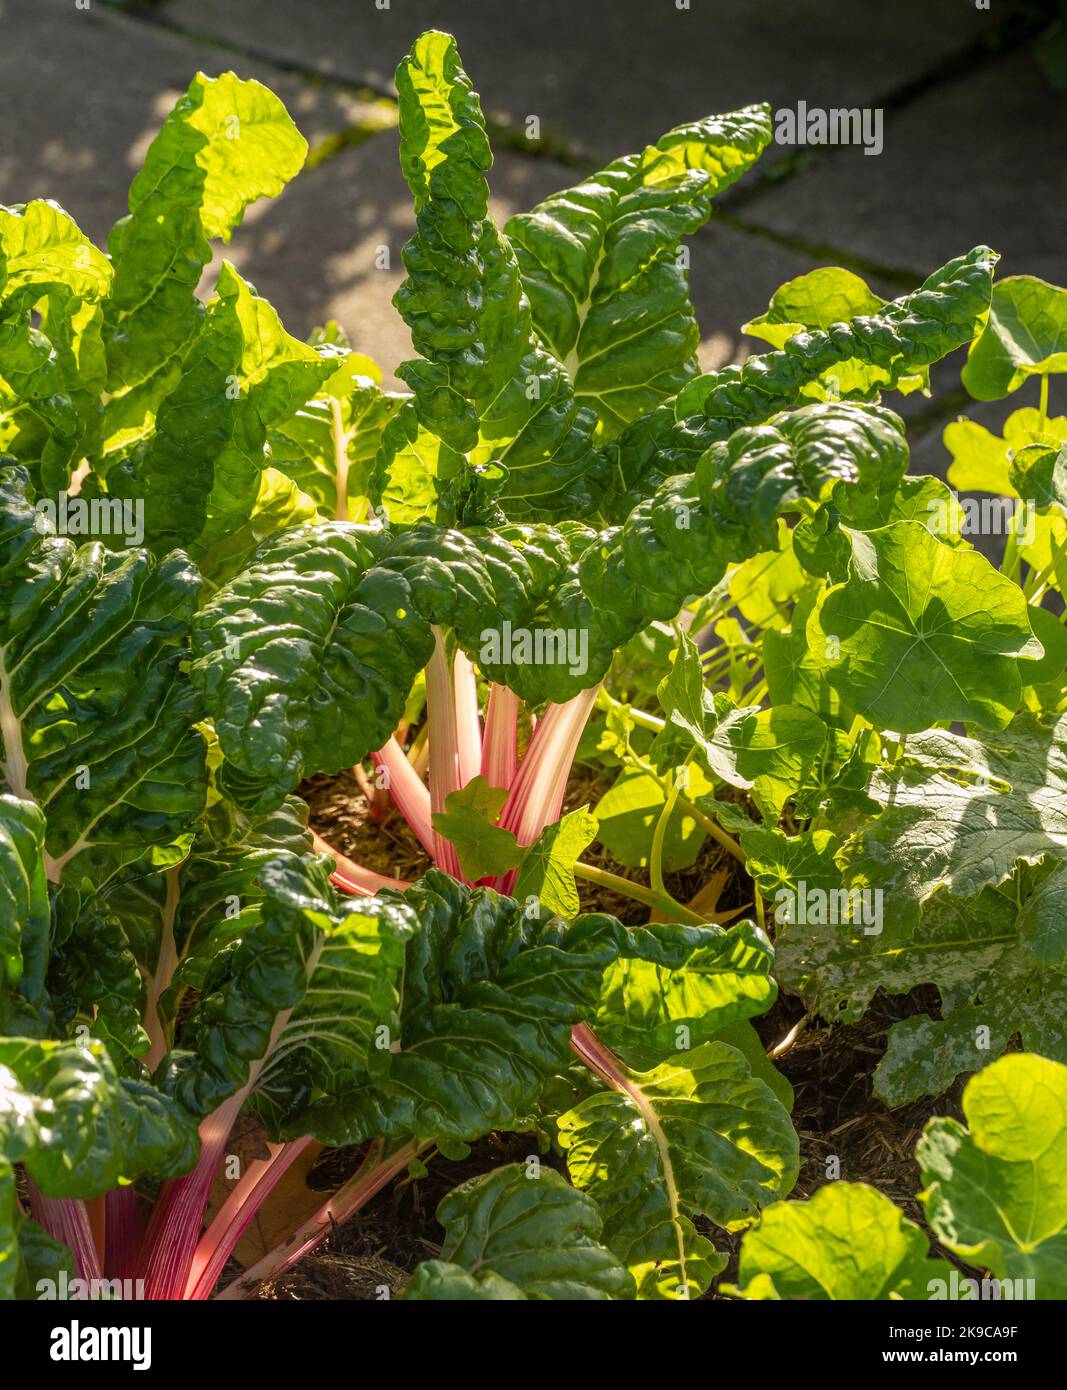 Backlit  Swiss Chard peppermint with its pink and white stems and large crinkly leaves growing in a UK garden. Stock Photo